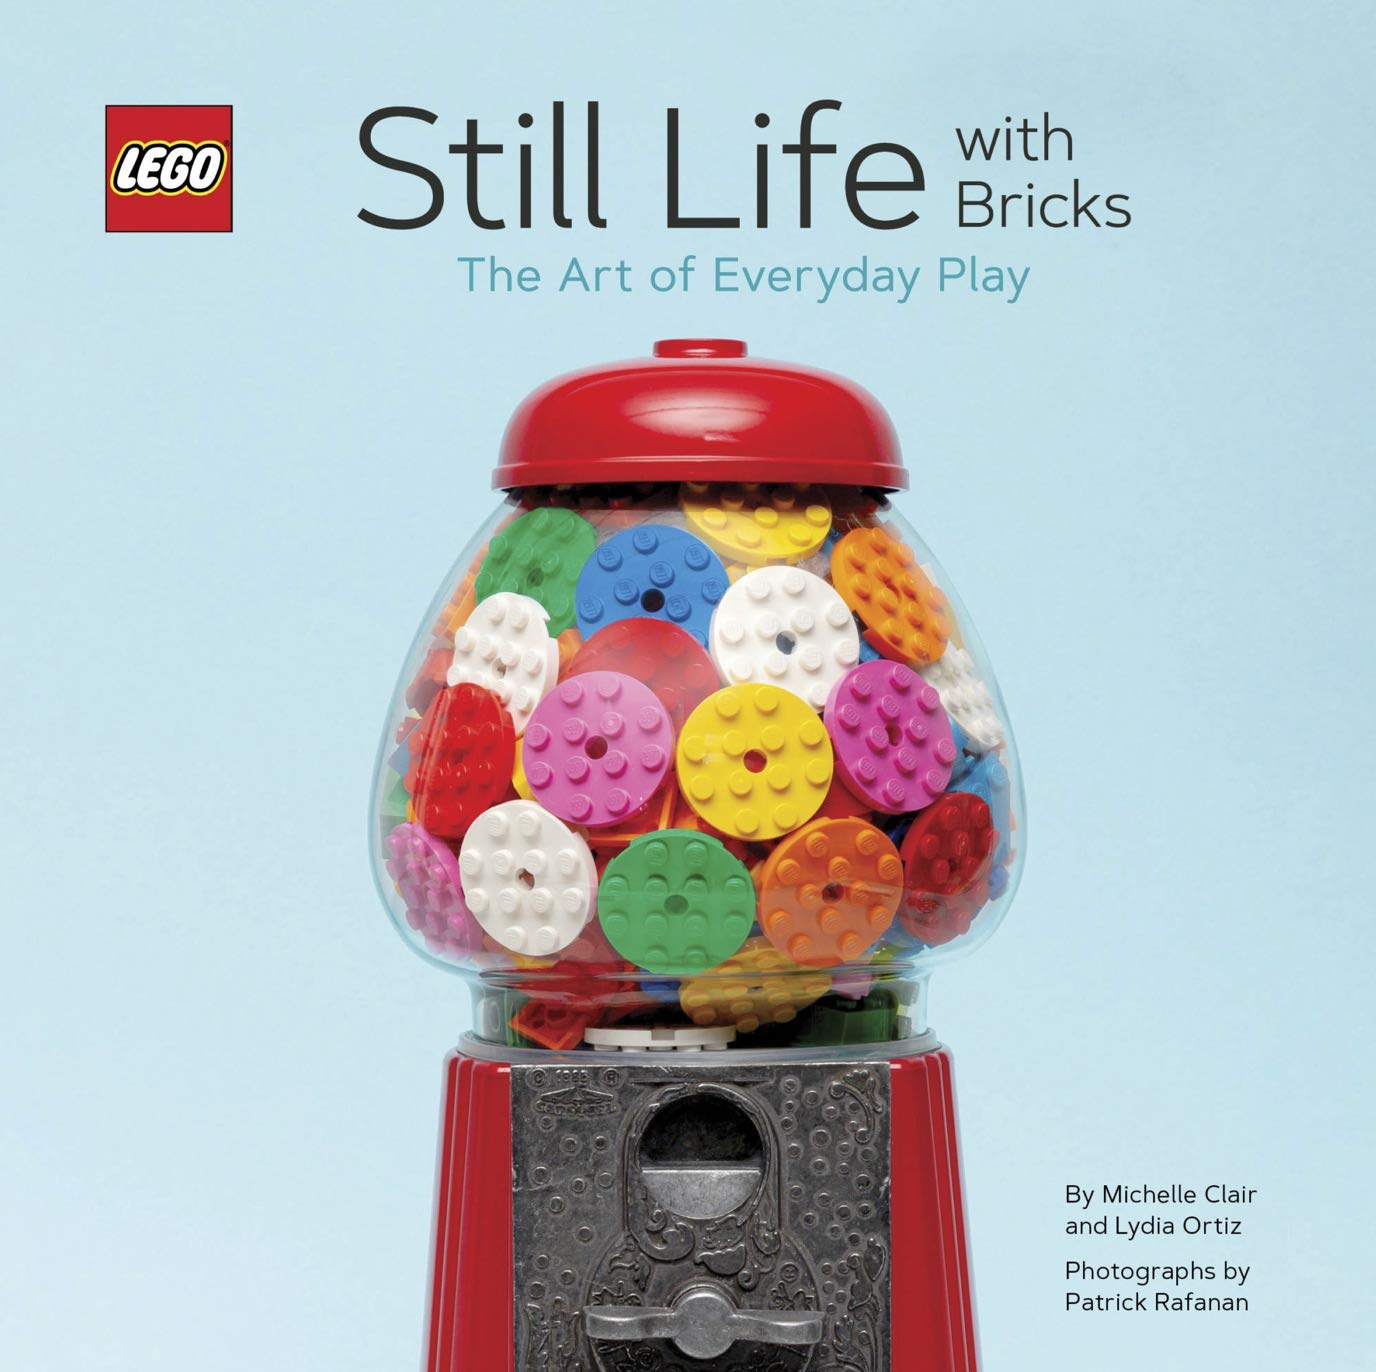 Image for "LEGO Still Life with Bricks: The Art of Everyday Play"